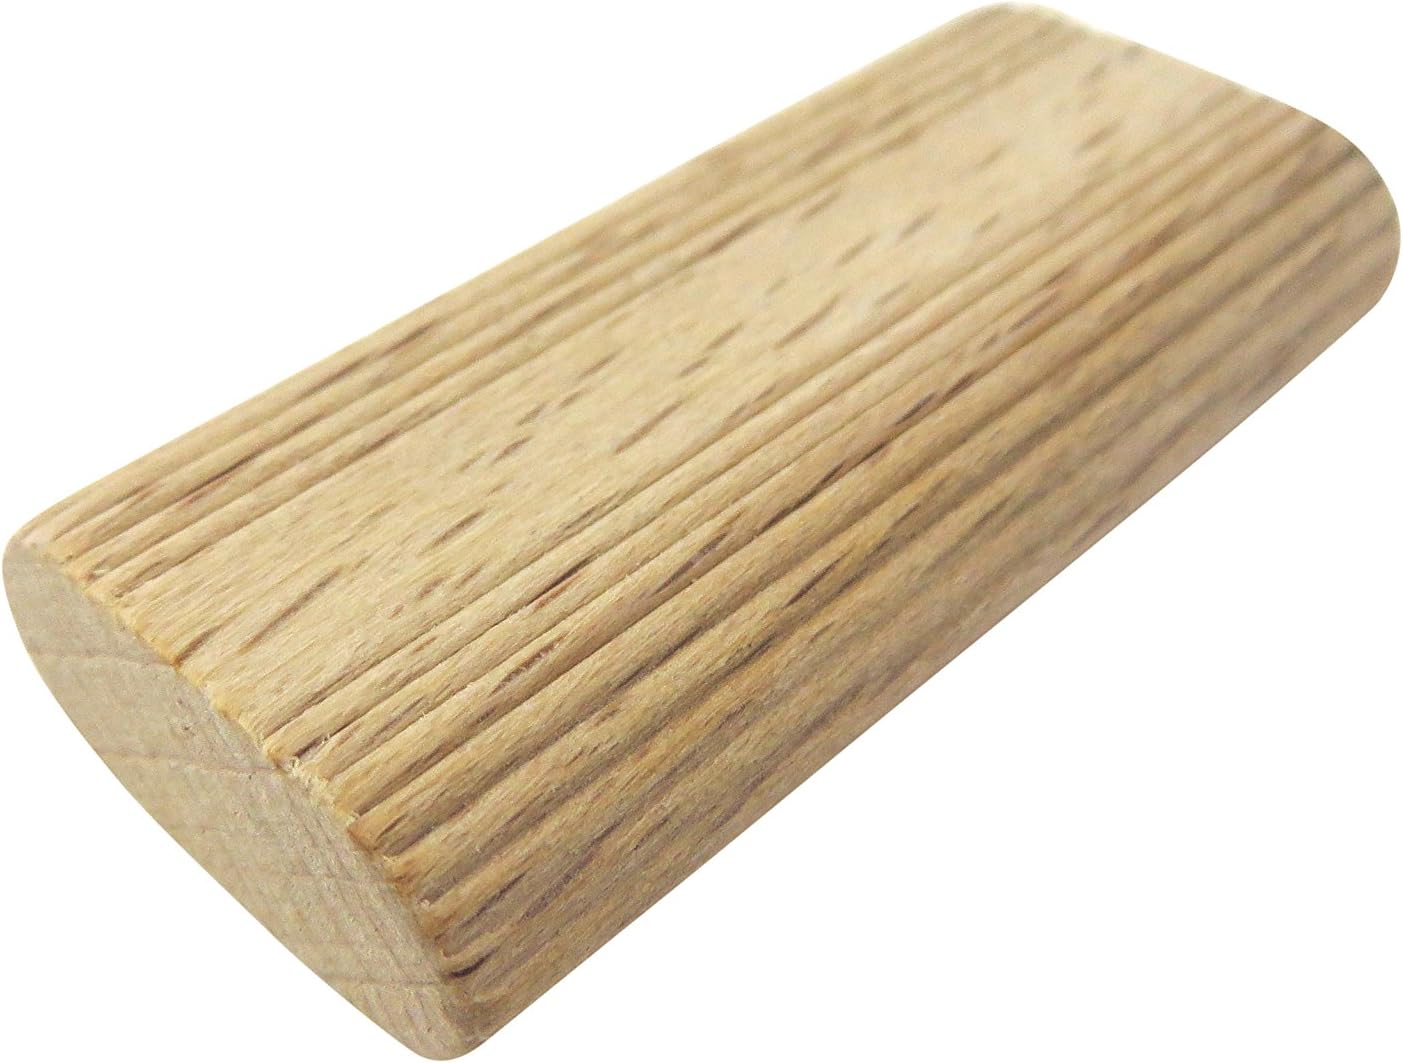 Taytools 100 Pack 10mm x 50mm x 24mm Beechwood Loose Tenons Compatible With Domino Loose Tenons Joinery Systems